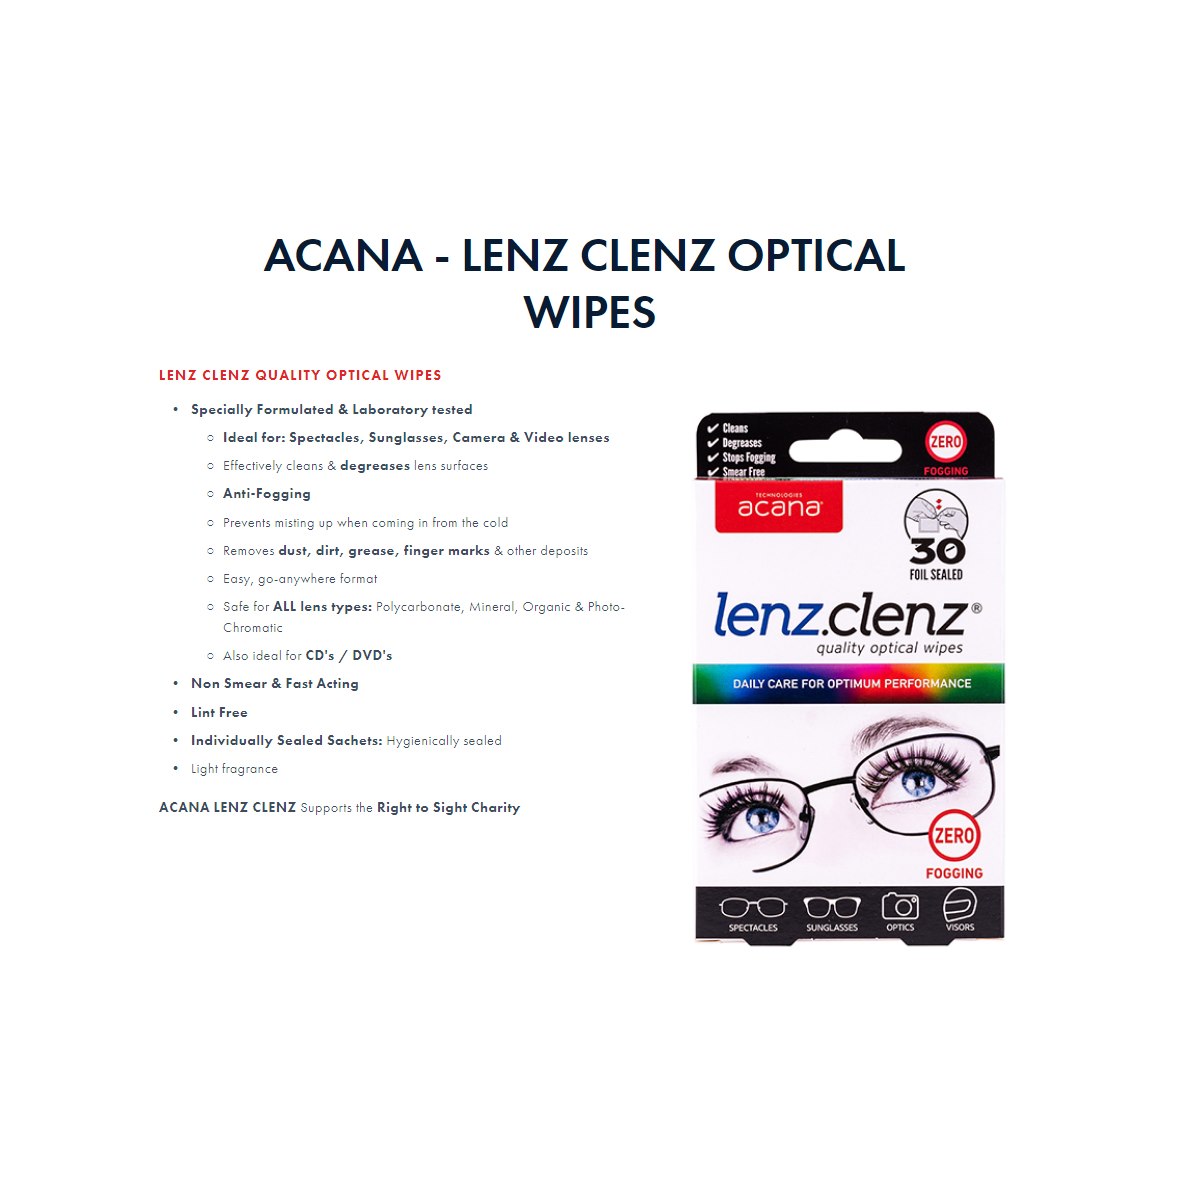 Acana Wipes for Glasses